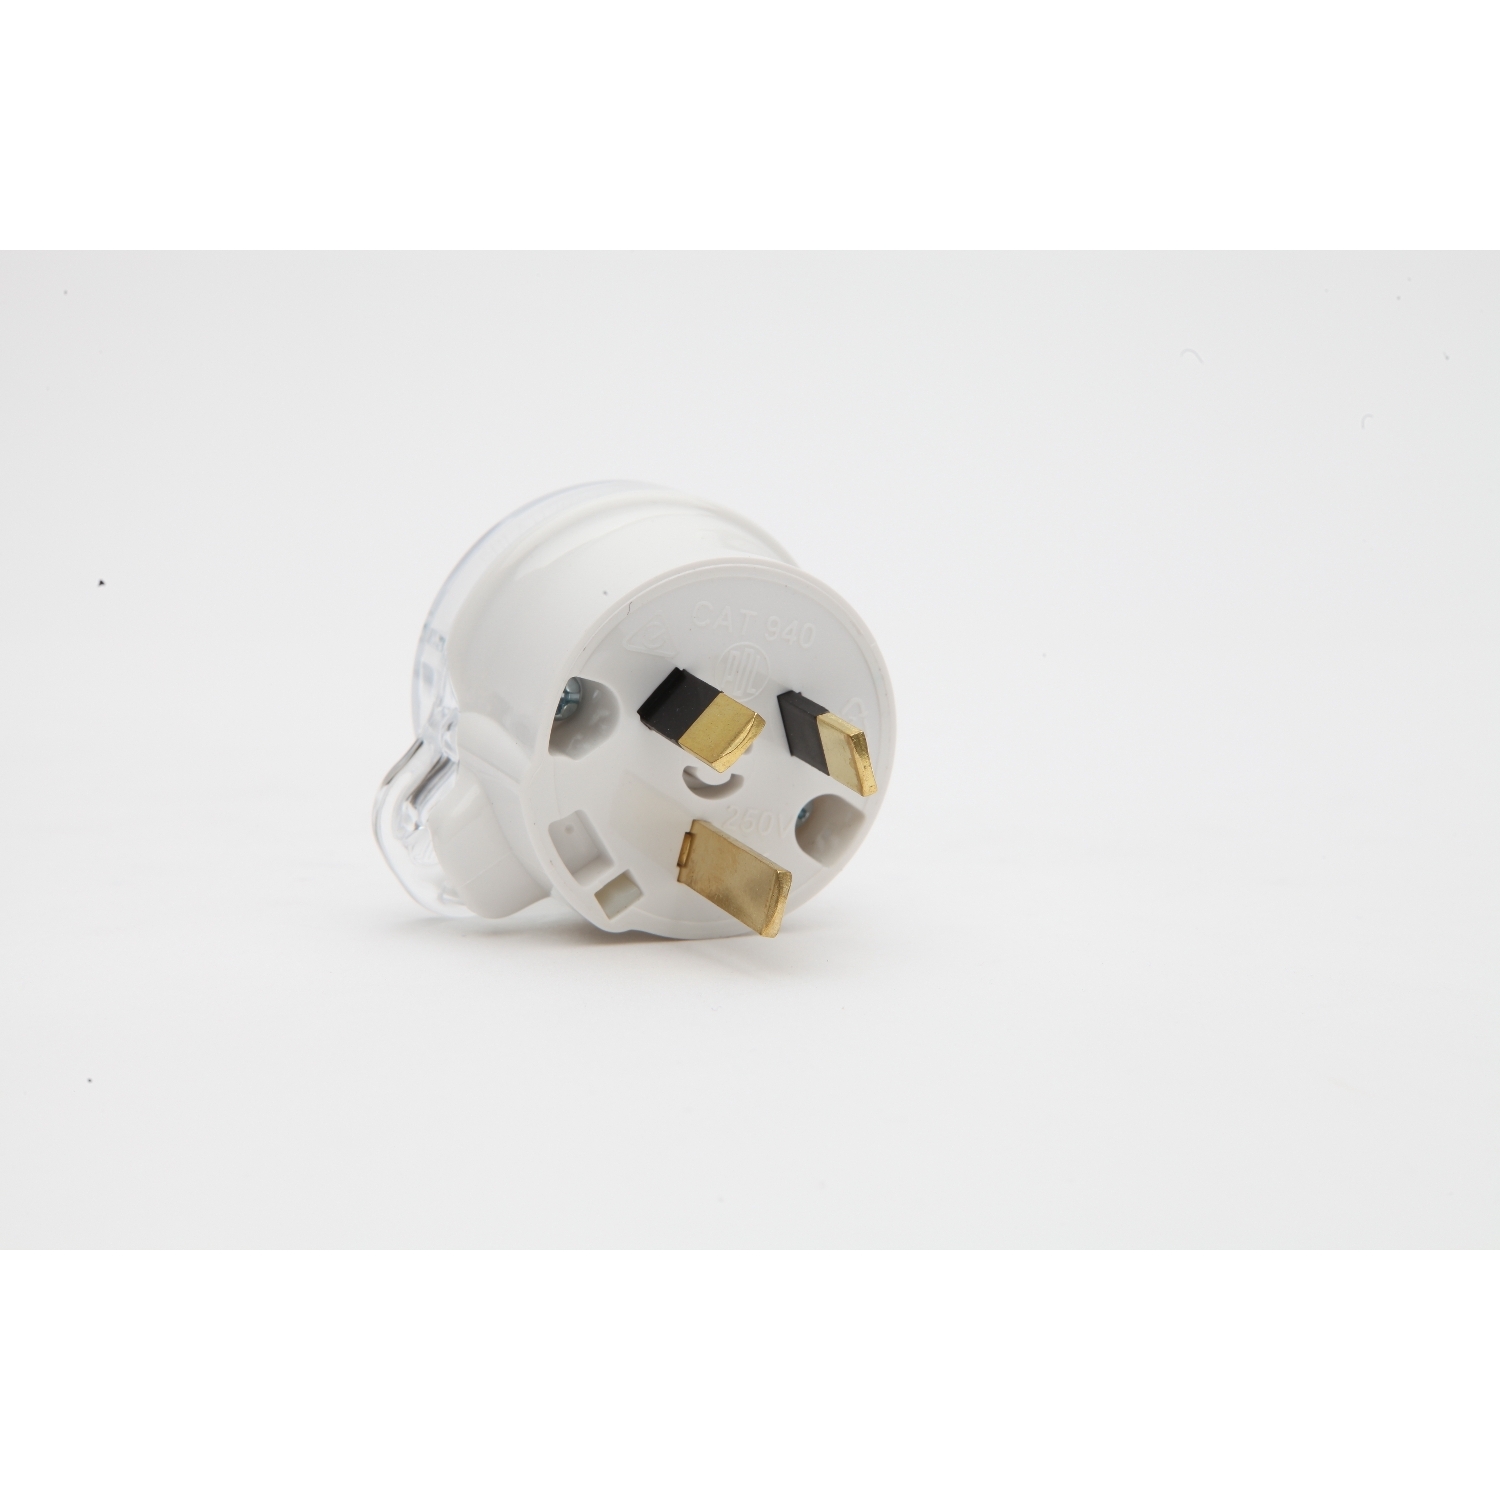 PDL 900 Series - Tapon Plug 10A Side-Entry 3-Pin Rewirable - Transparant